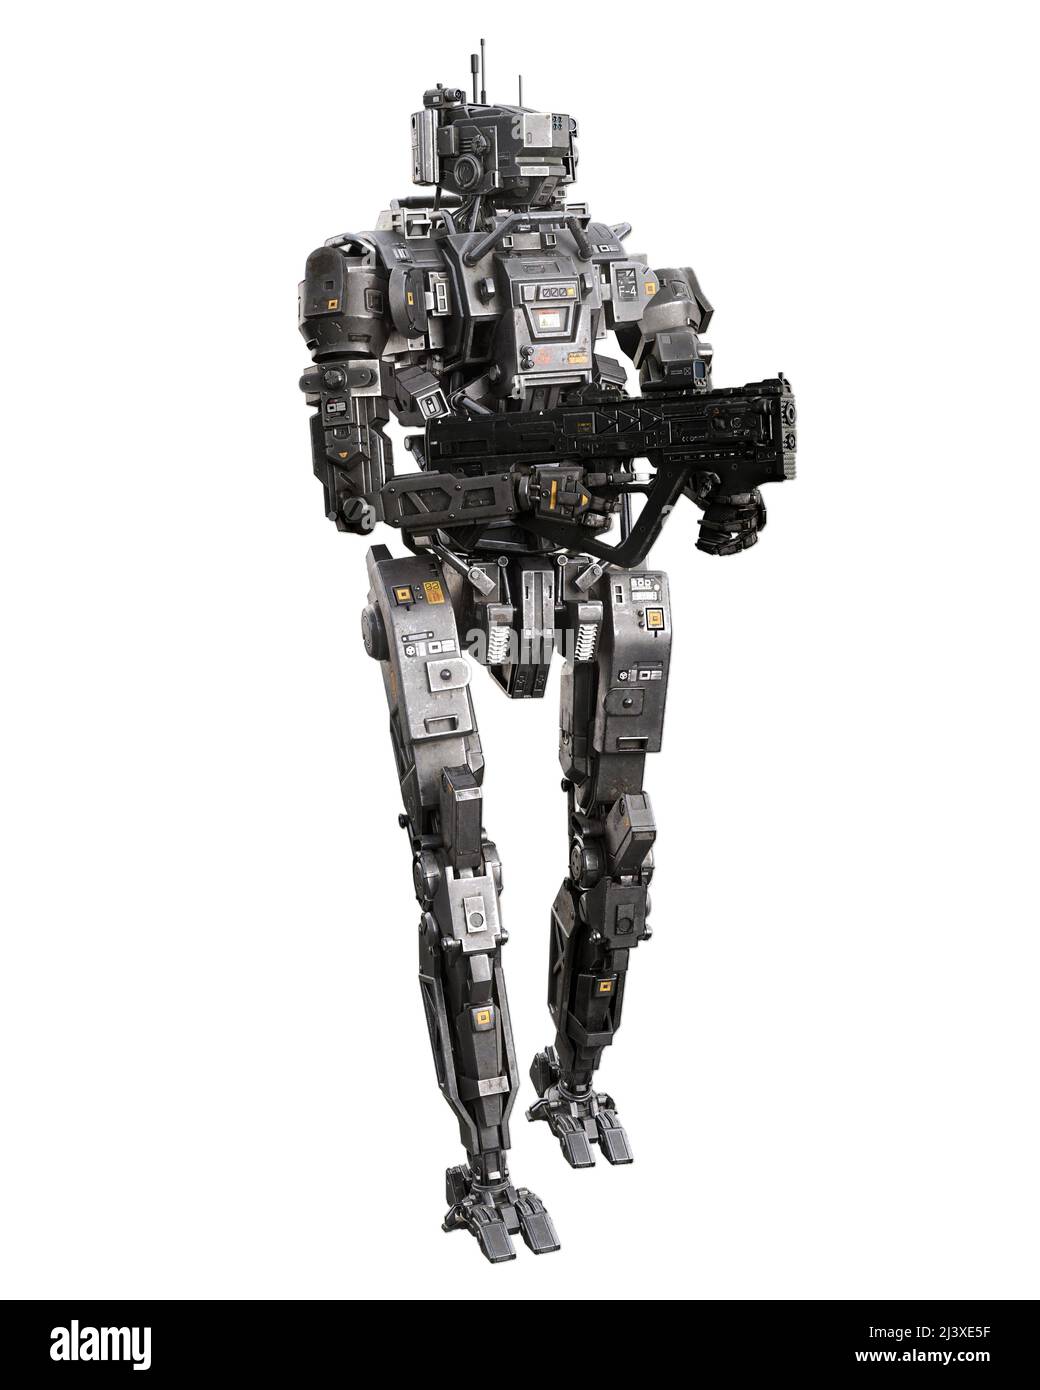 Fantasy futuristic cyberpunk droid robot walking and firing a submachine gun. 3D illustration isolated on white background with clipping path. Stock Photo